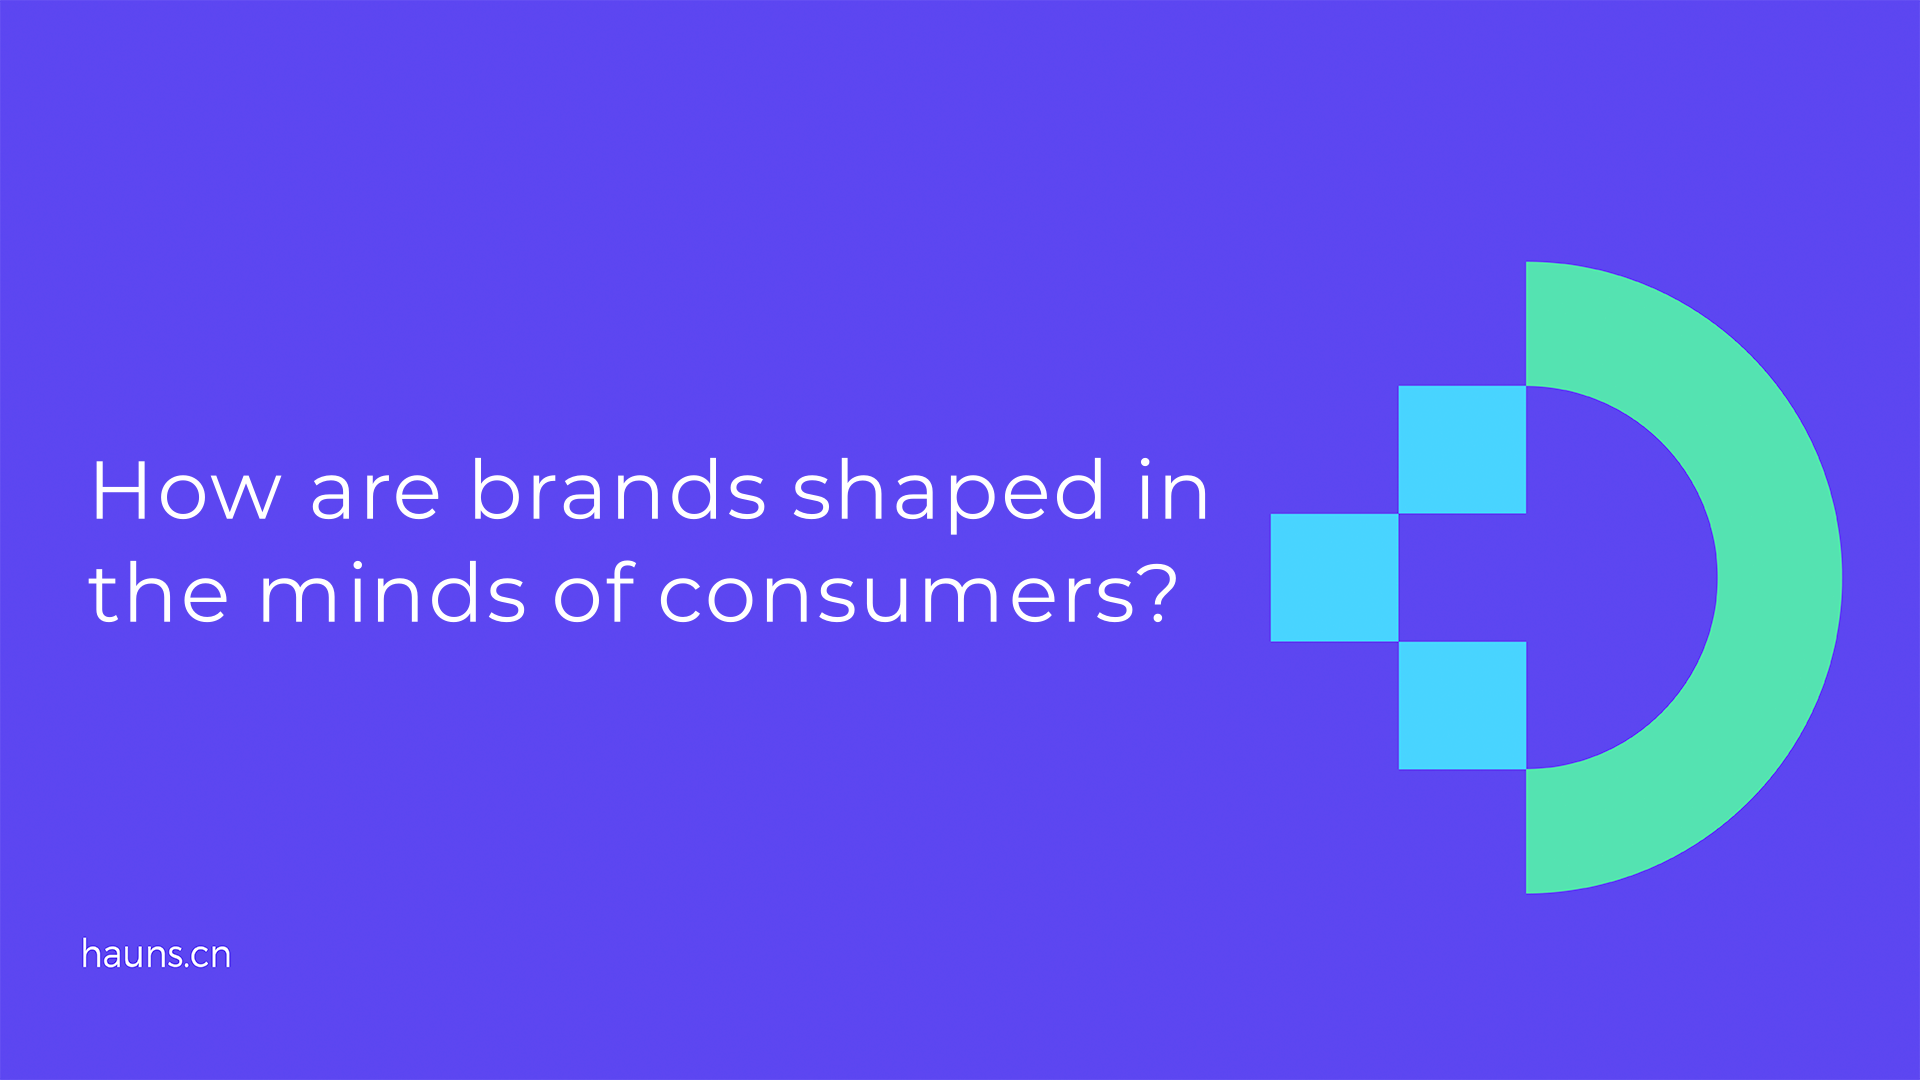 How are brands shaped in the minds of consumers?